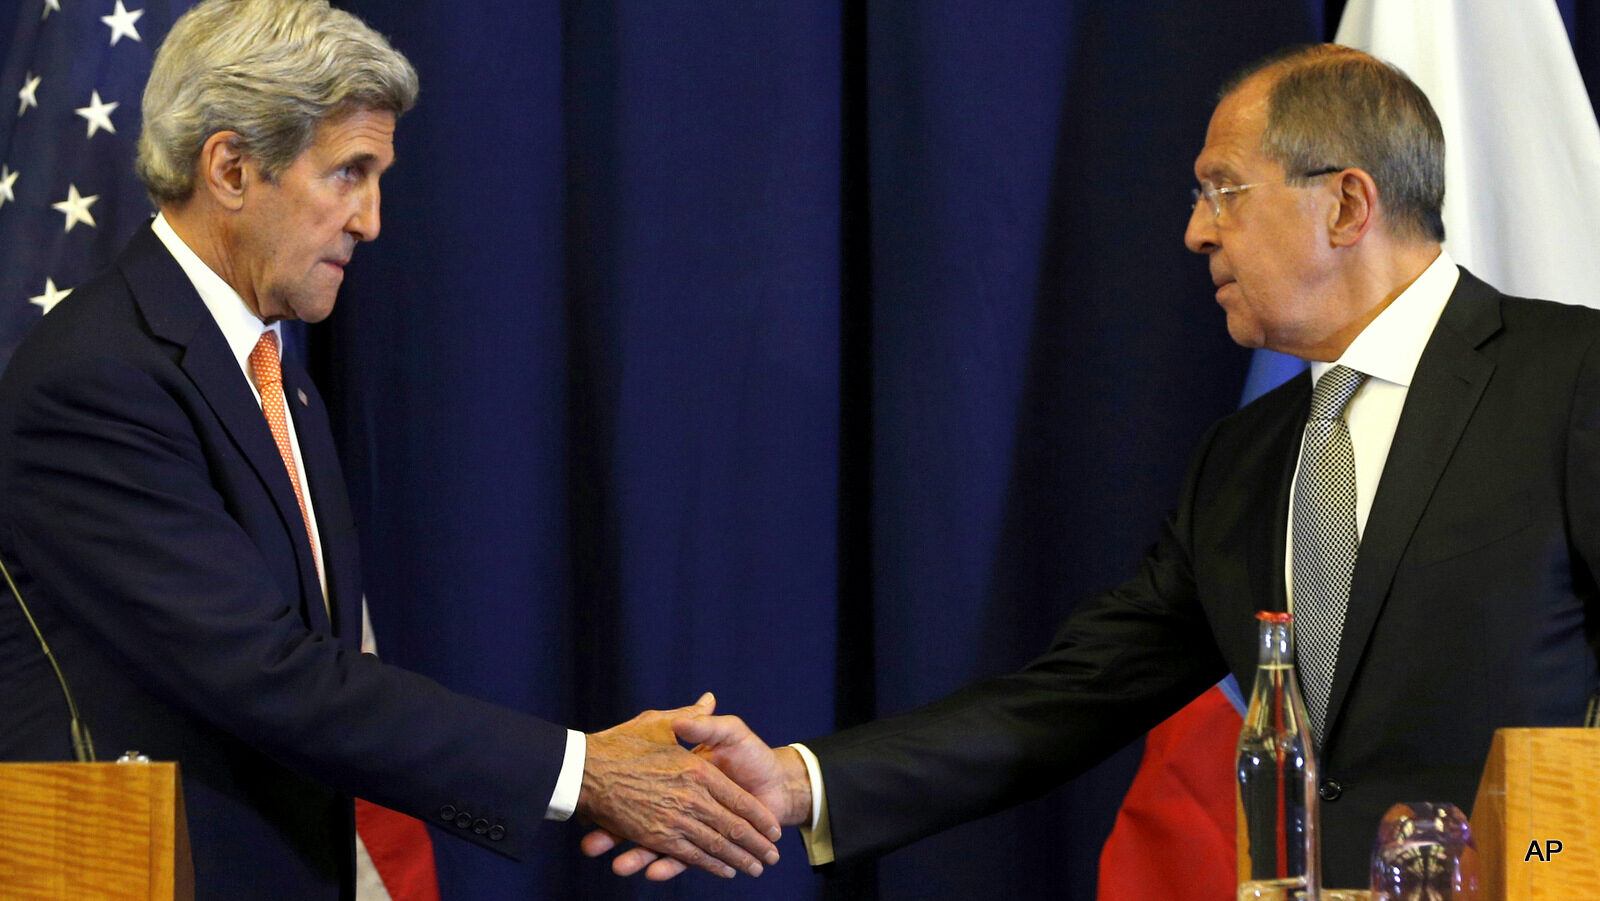 Secretary of State John Kerry, left, and Russian Foreign Minister Sergei Lavrov shakes hands at the conclusion of a news conference following their meeting to discuss the crisis in Syria, in Geneva, Switzerland.